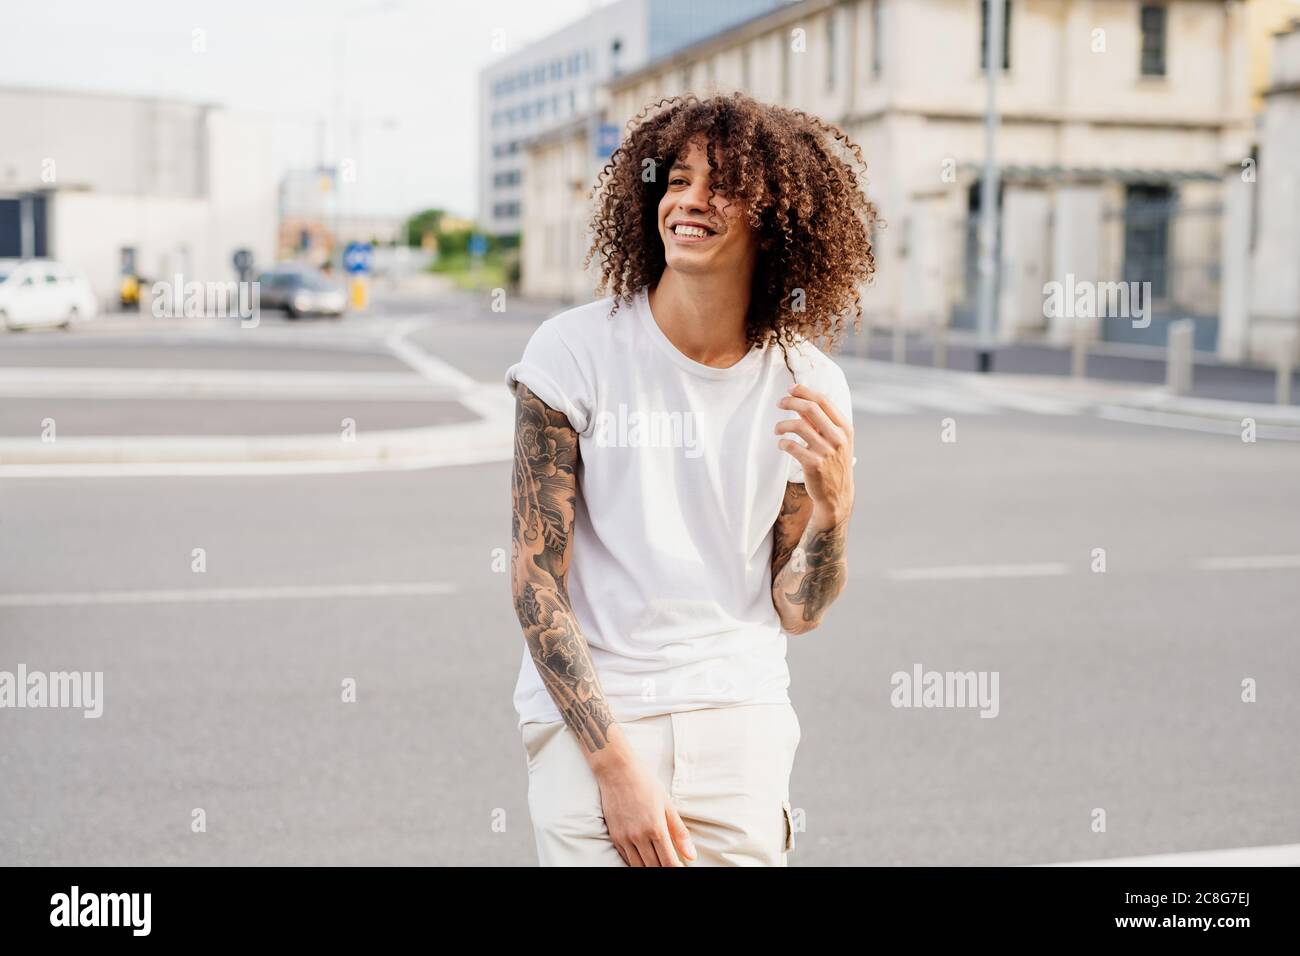 Smiling man with tattooed arms and long brown curly hair standing on a street. Stock Photo